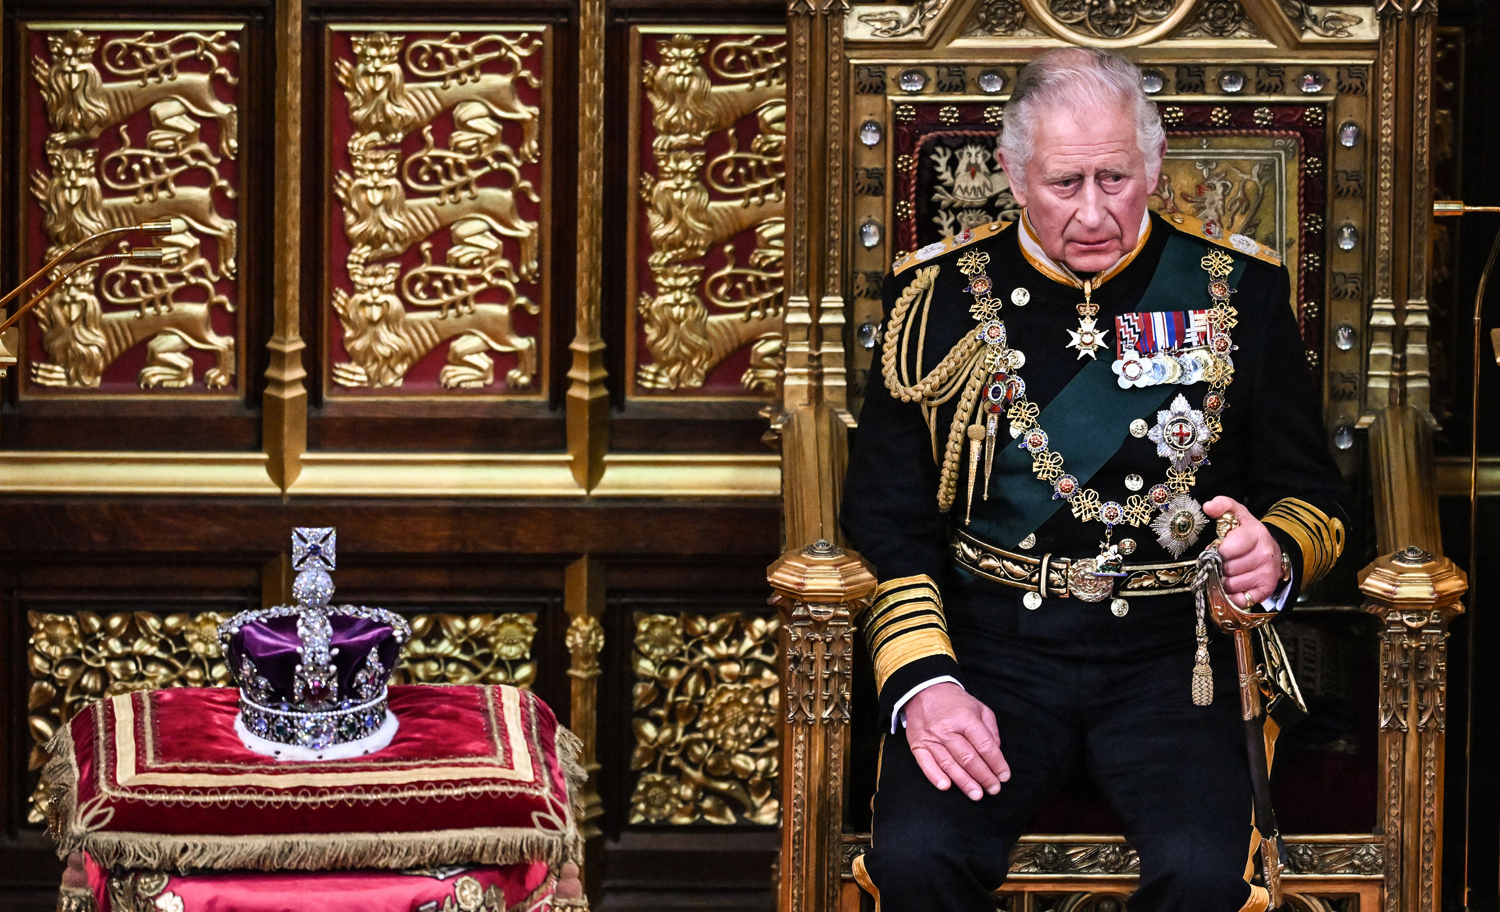 Prince Charles Delivers Queen's Speech For the First Time in the Parliament